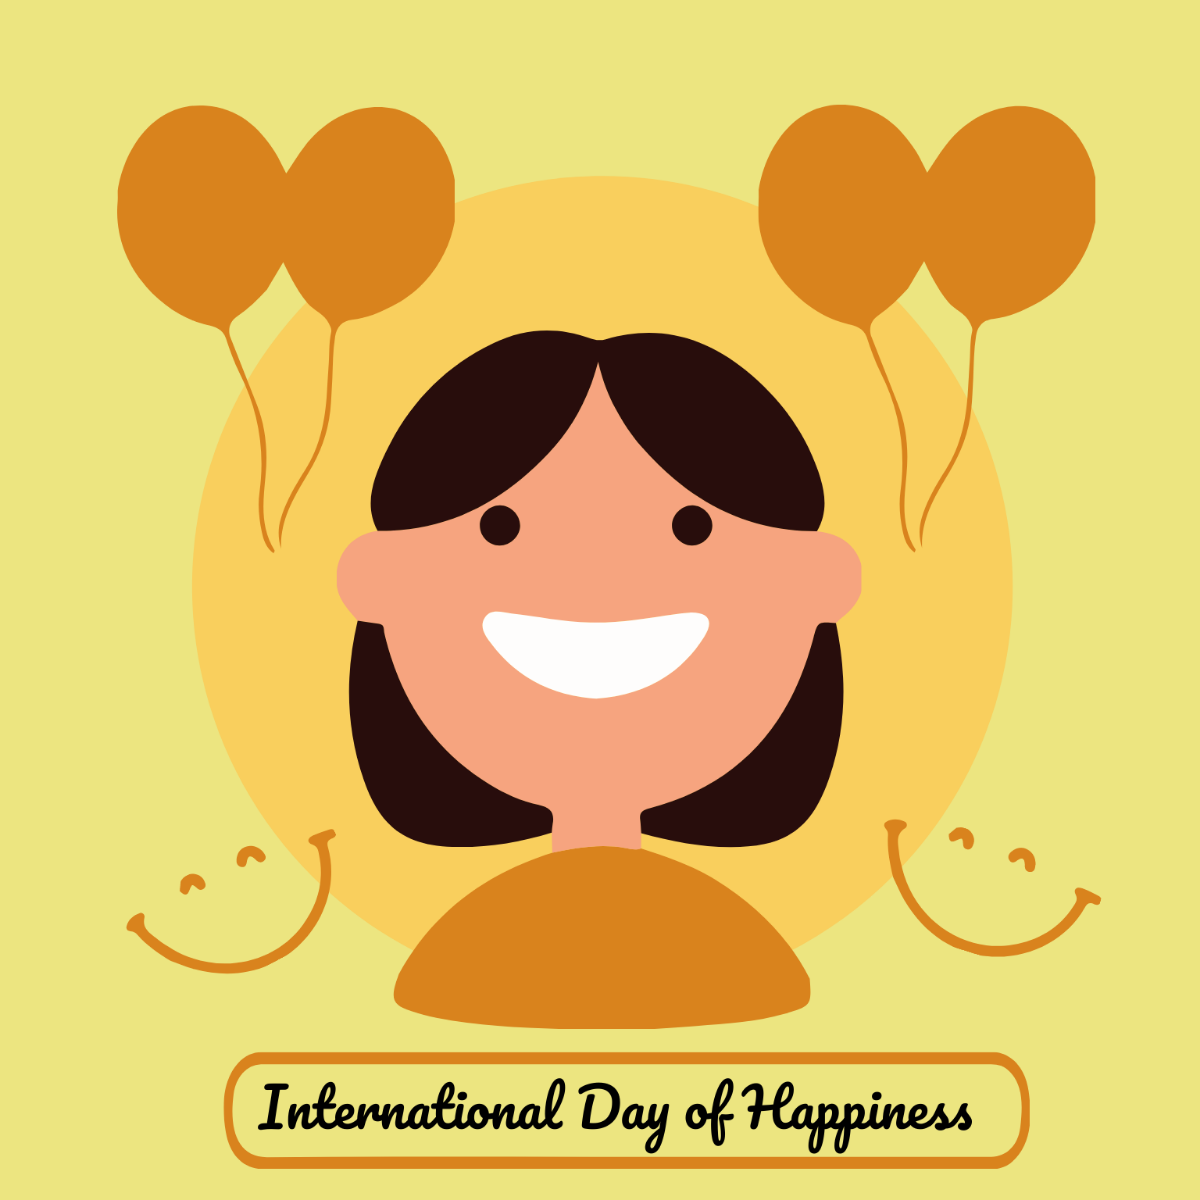 International Day of Happiness Celebration Vector